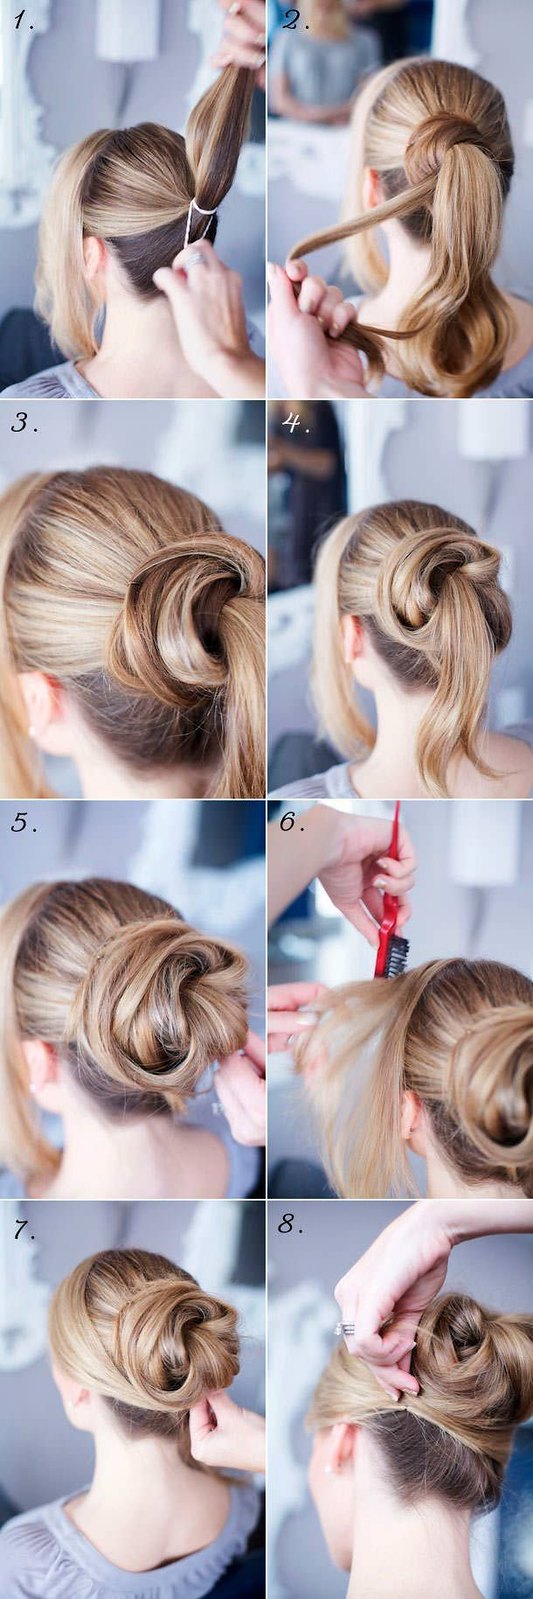 Different Hairstyles for Girls